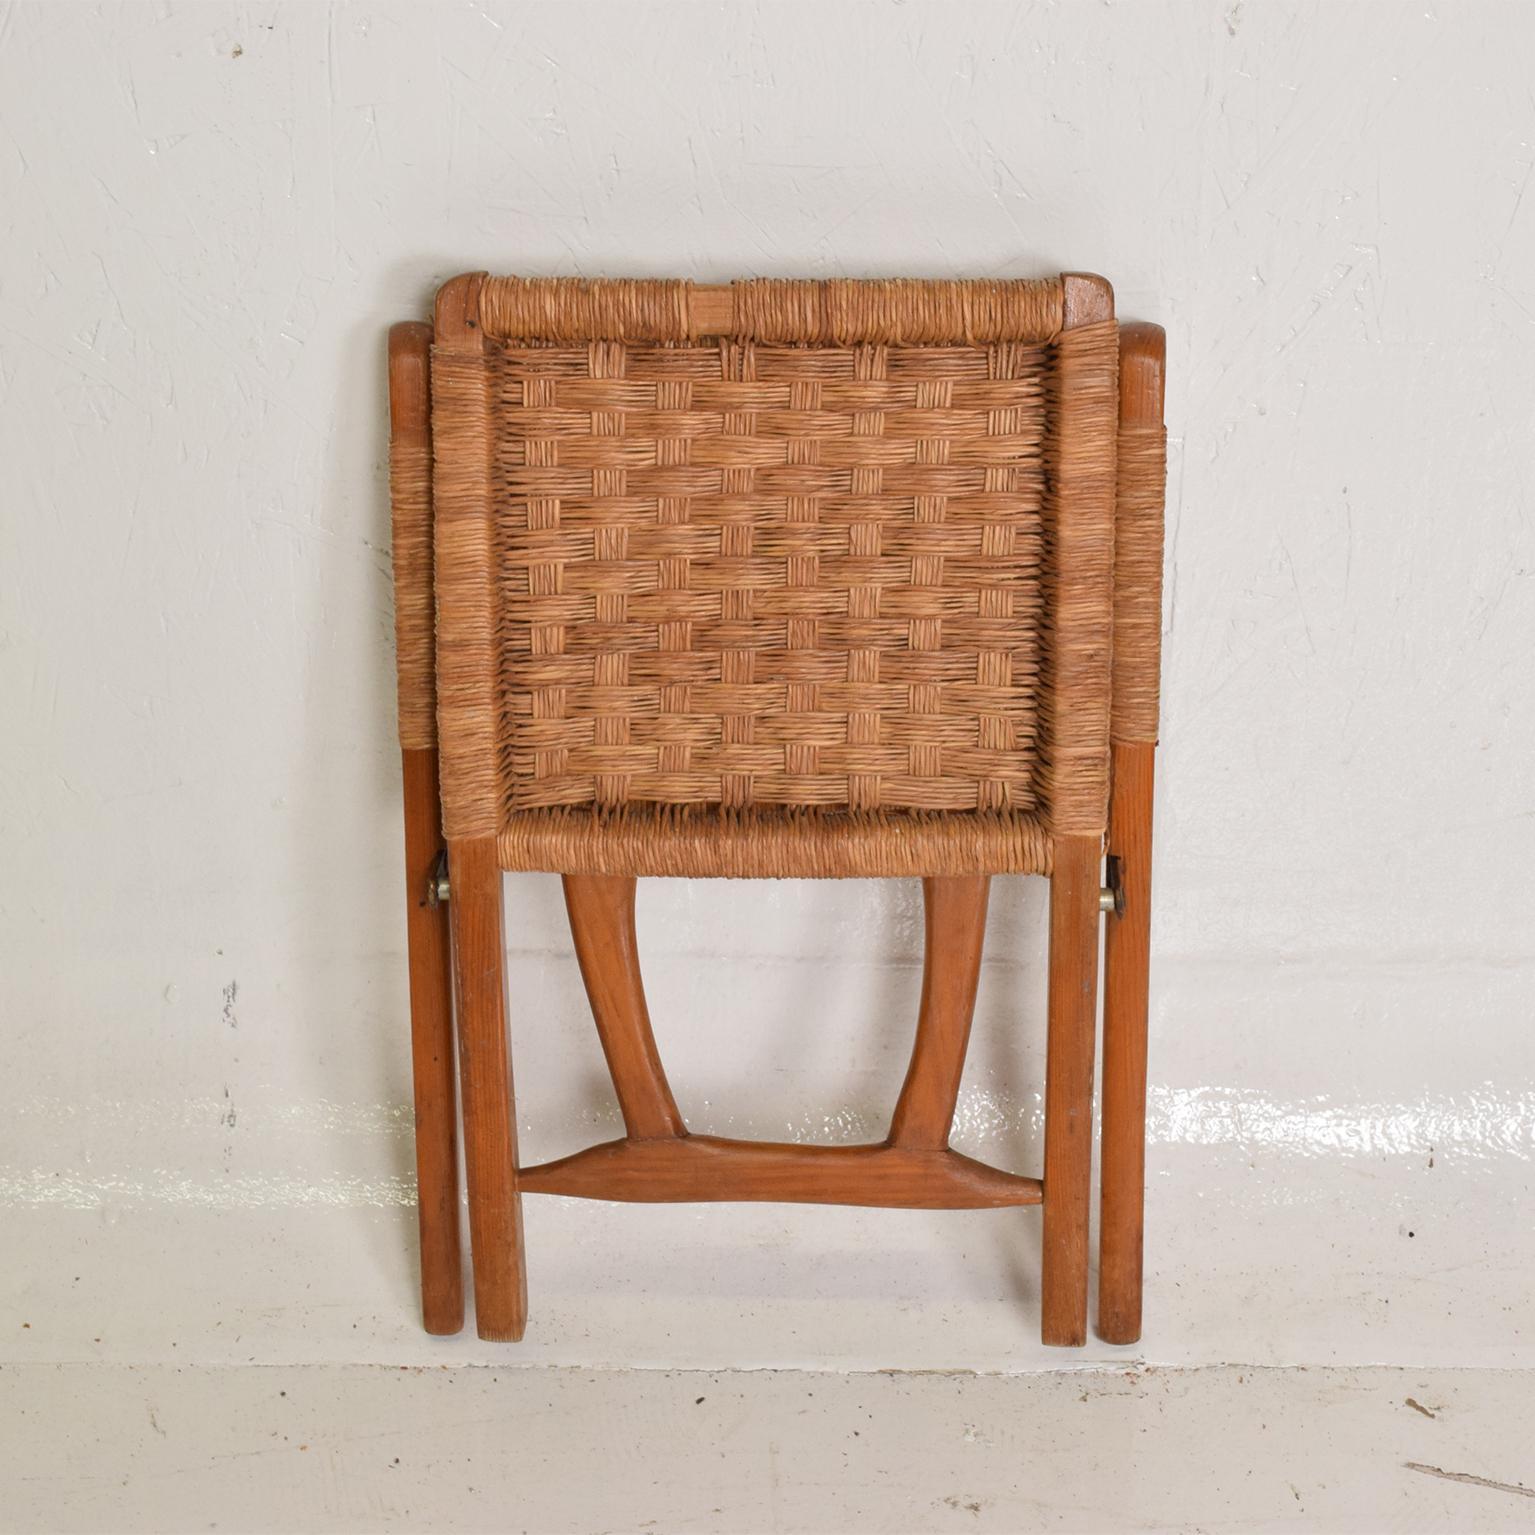 Mid-20th Century Mexican Modernist Small Folding Chair after Clara Porset